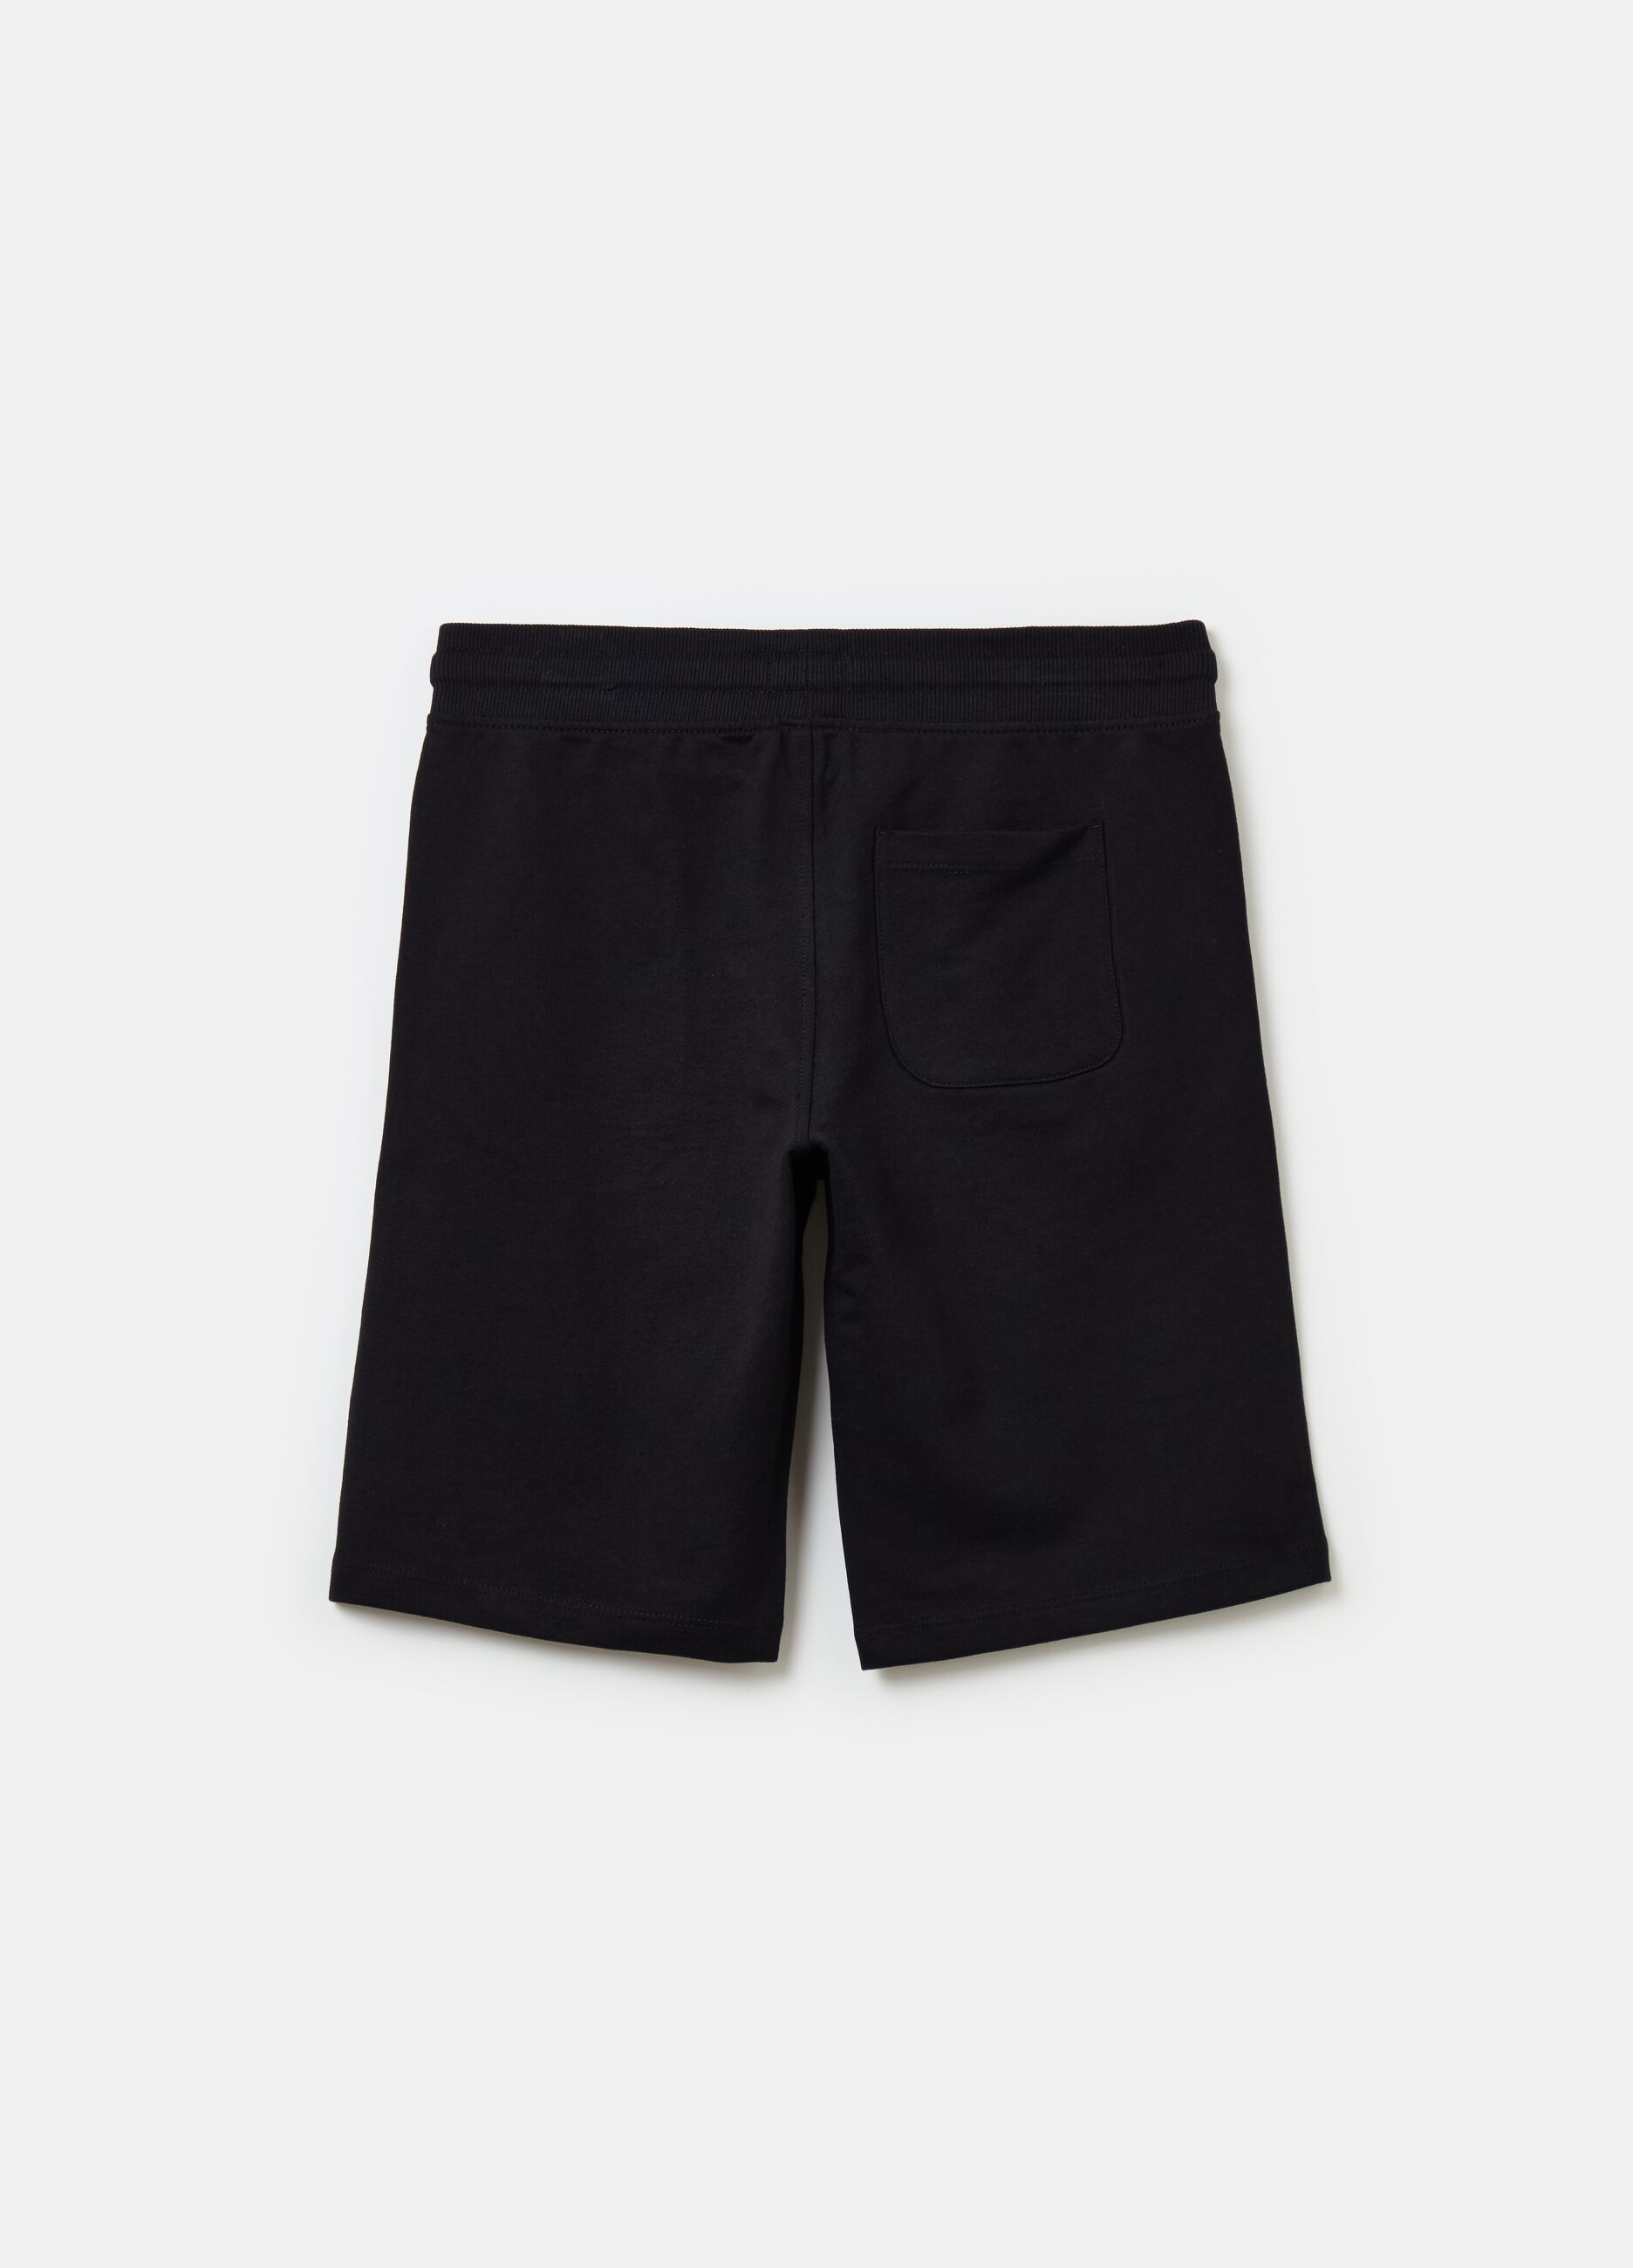 Bermuda shorts in French terry with drawstring